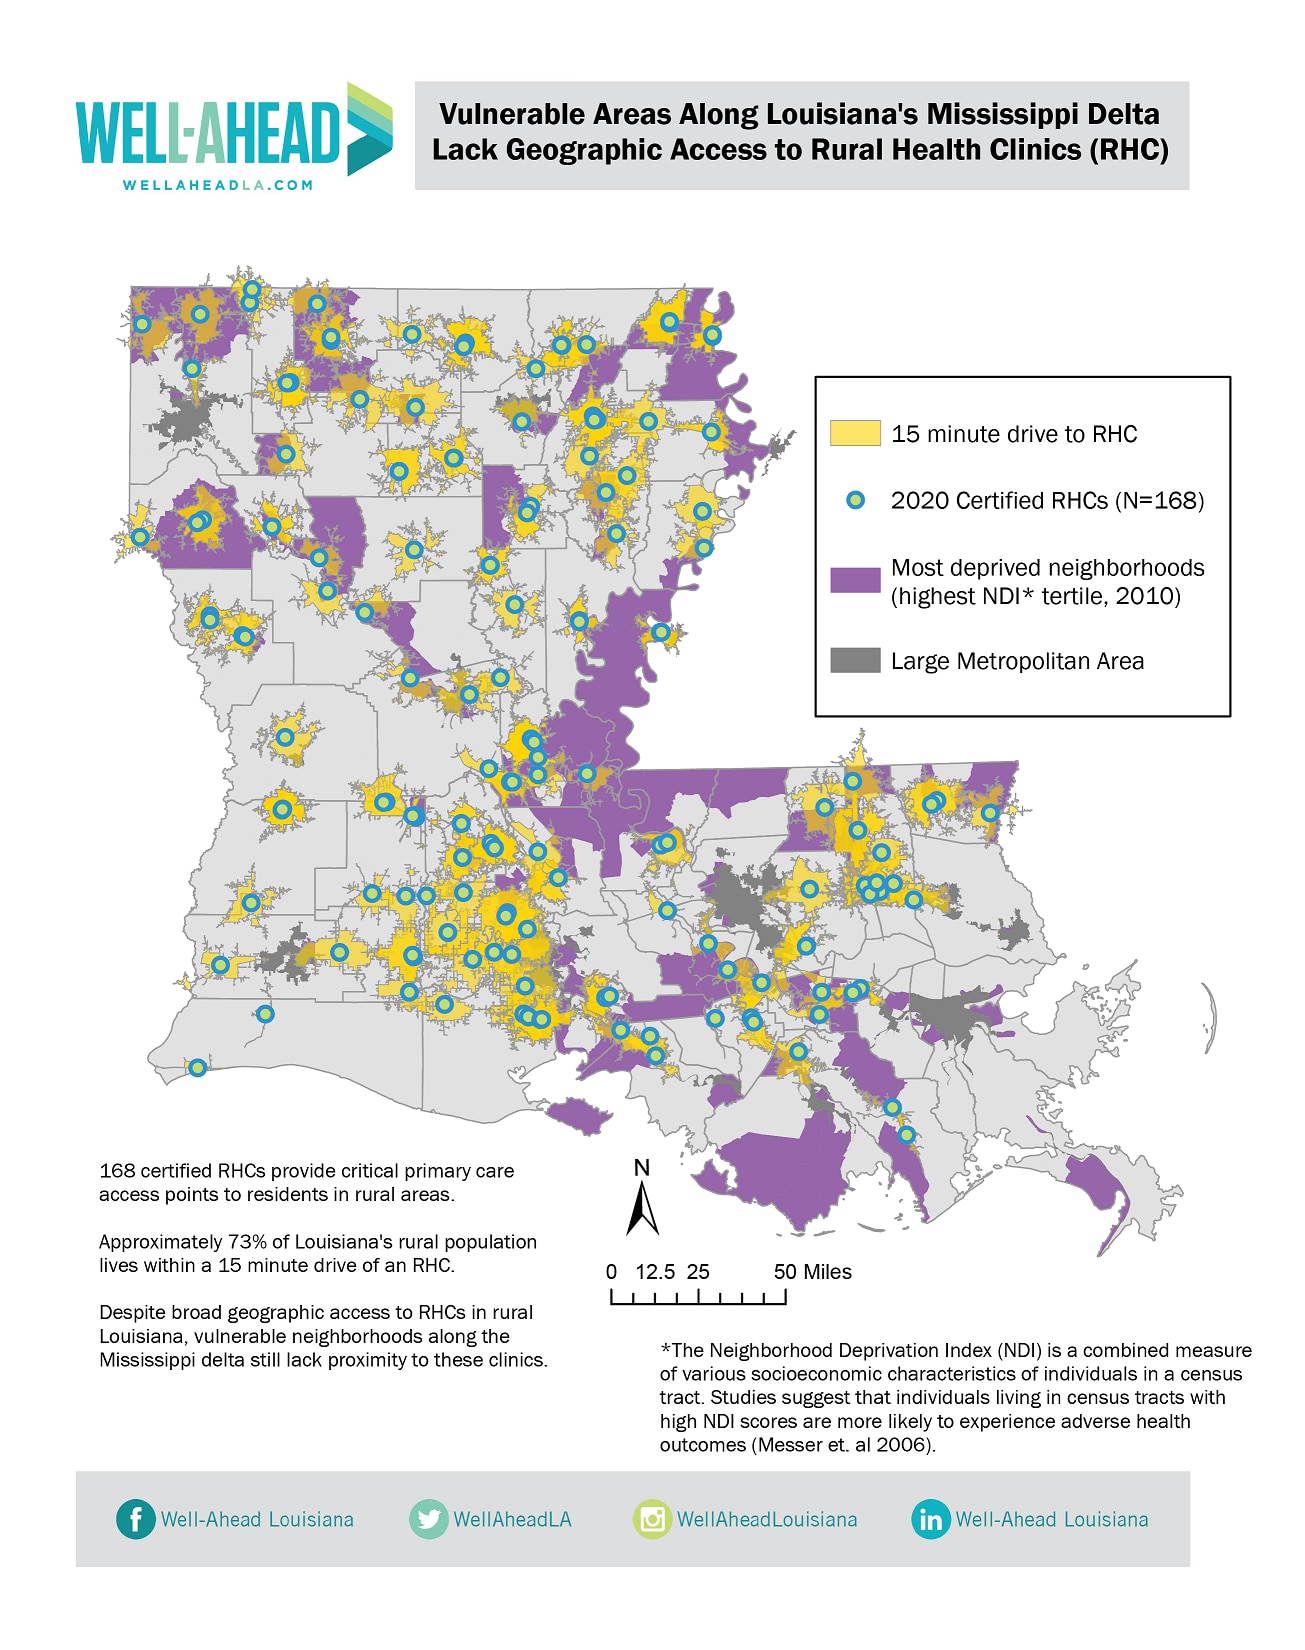 Vulnerable Areas Along Louisiana's Mississippi Delta Lack Geographic Access to Rural Health Clinics (RHC)